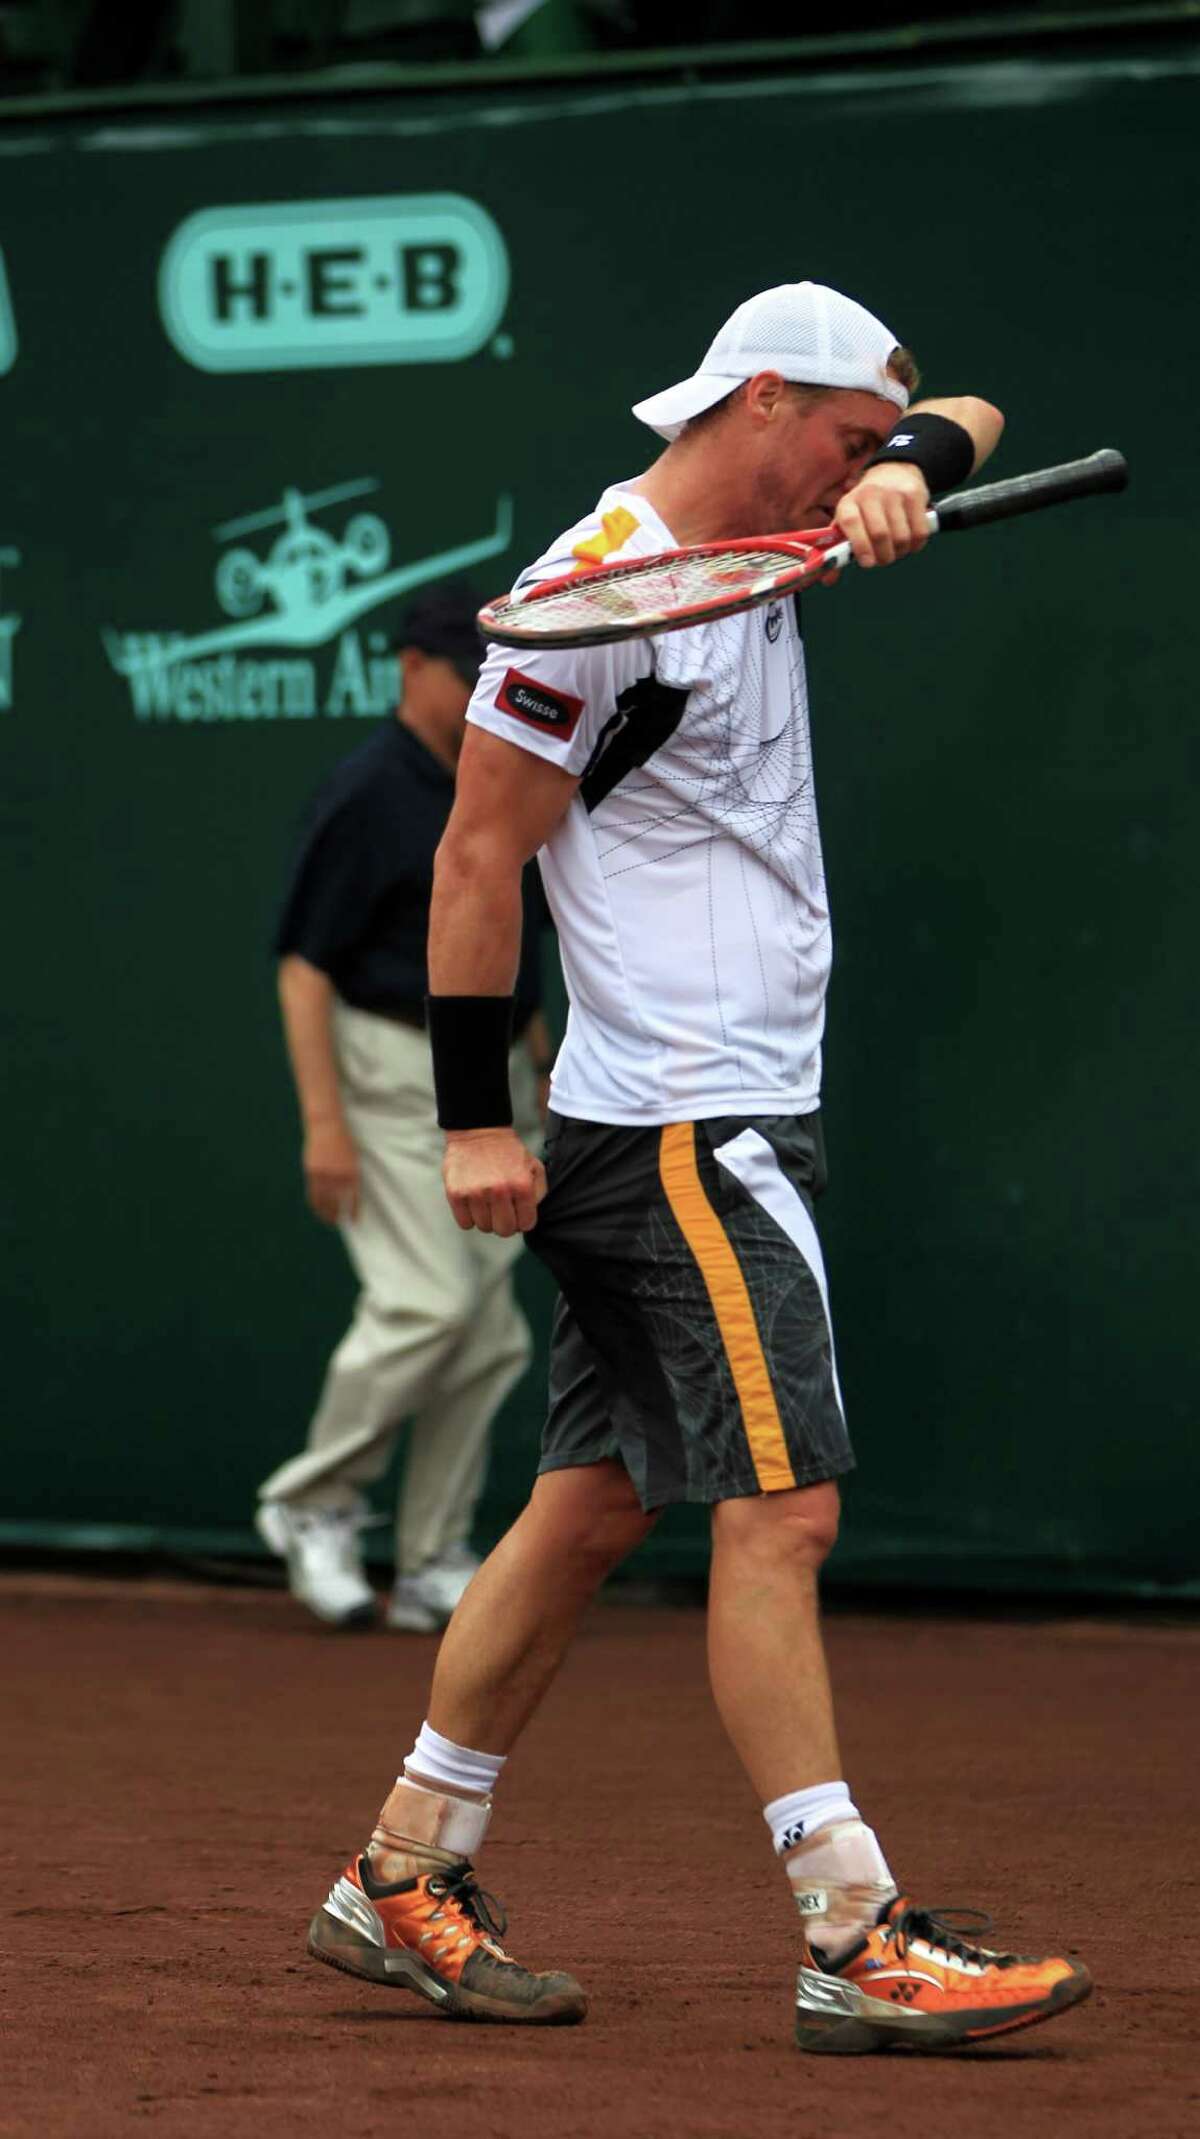 Lleyton Hewitt was fighting jet lag and illness after coming to Houston from Uzbekistan.